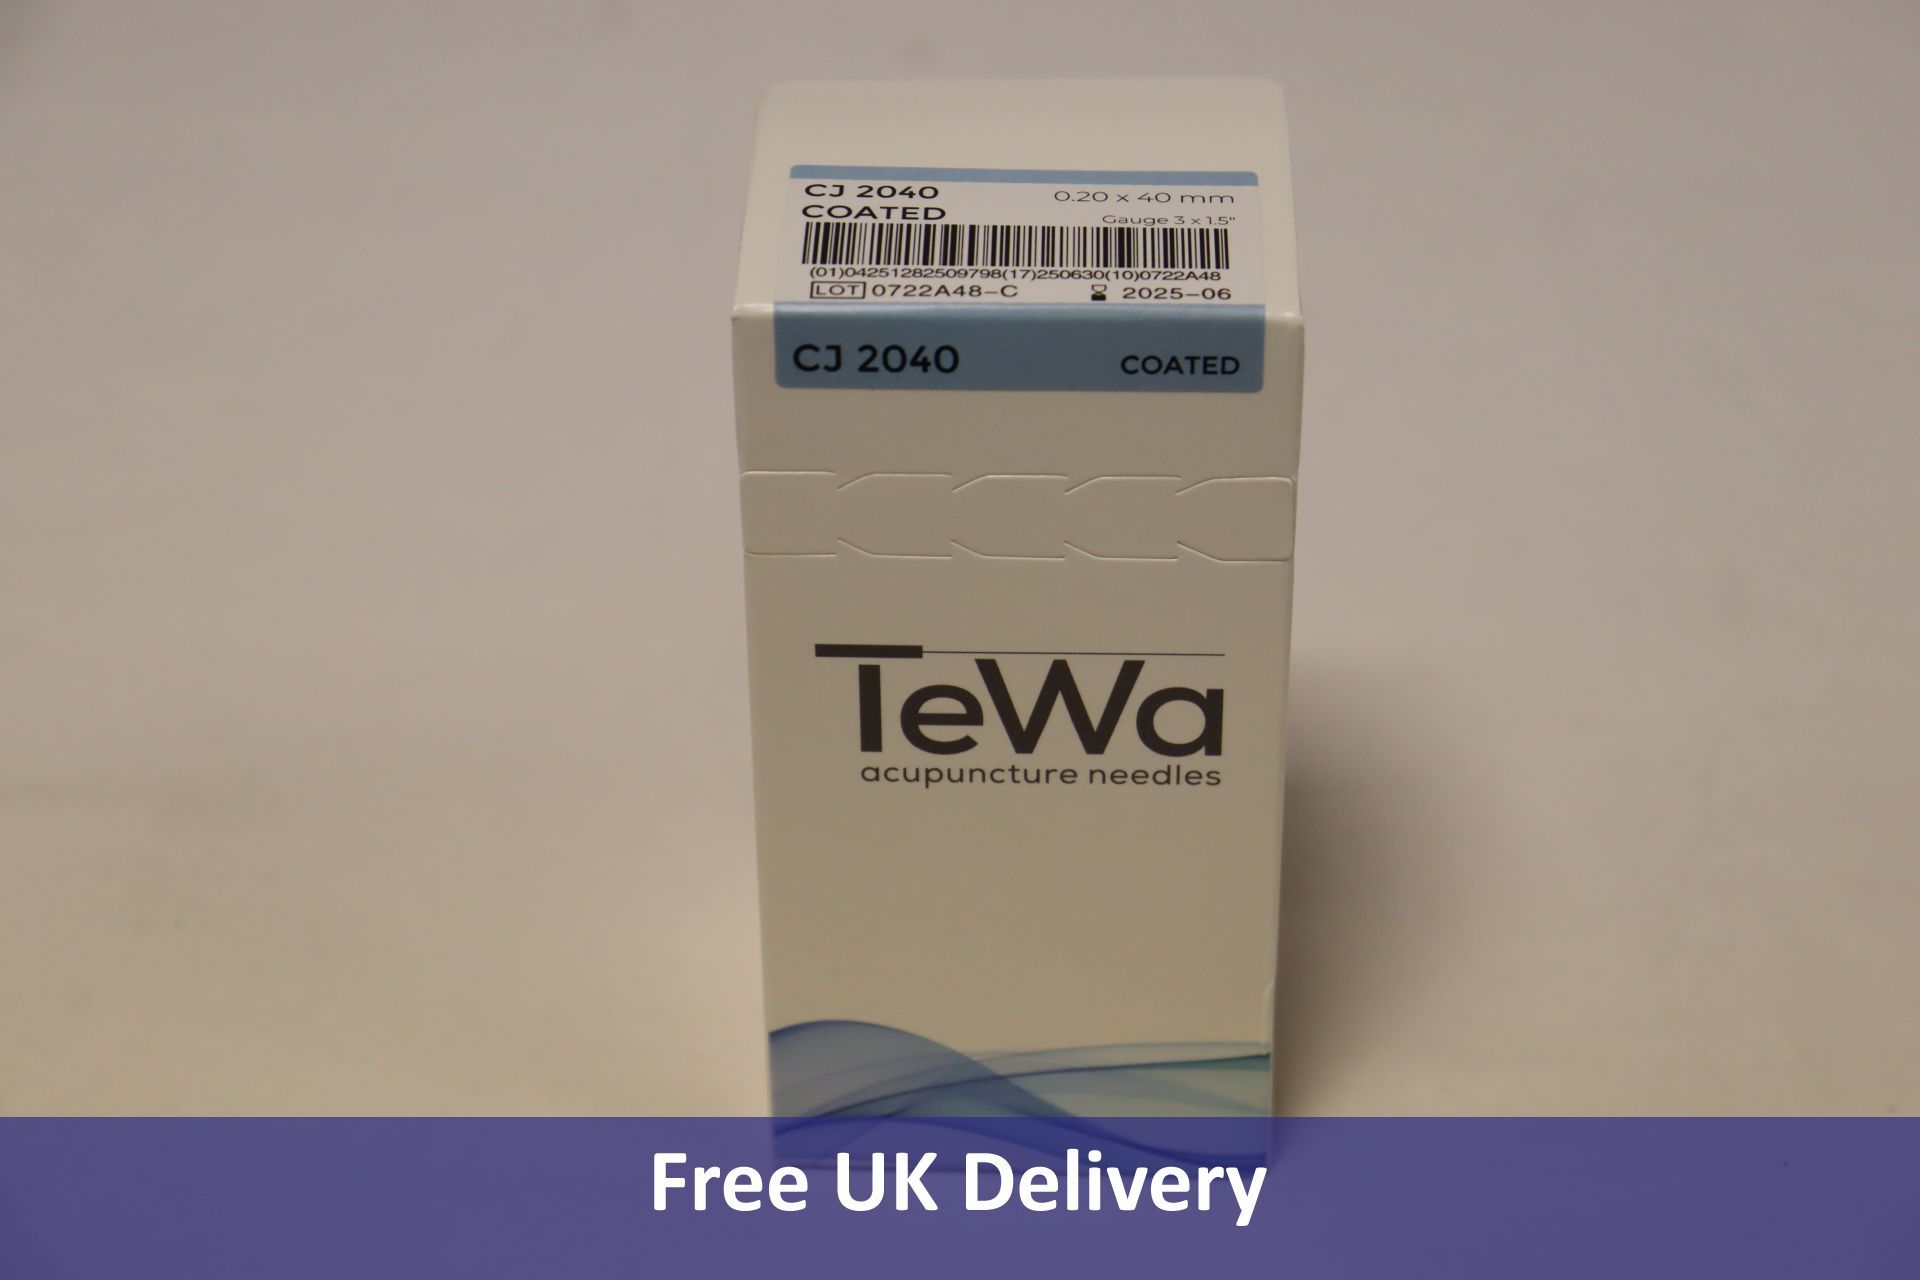 Ten-thousand Tewa Acupuncture Needles, 0.20 x 40mm, in 100 packs of 100 - Image 10 of 10